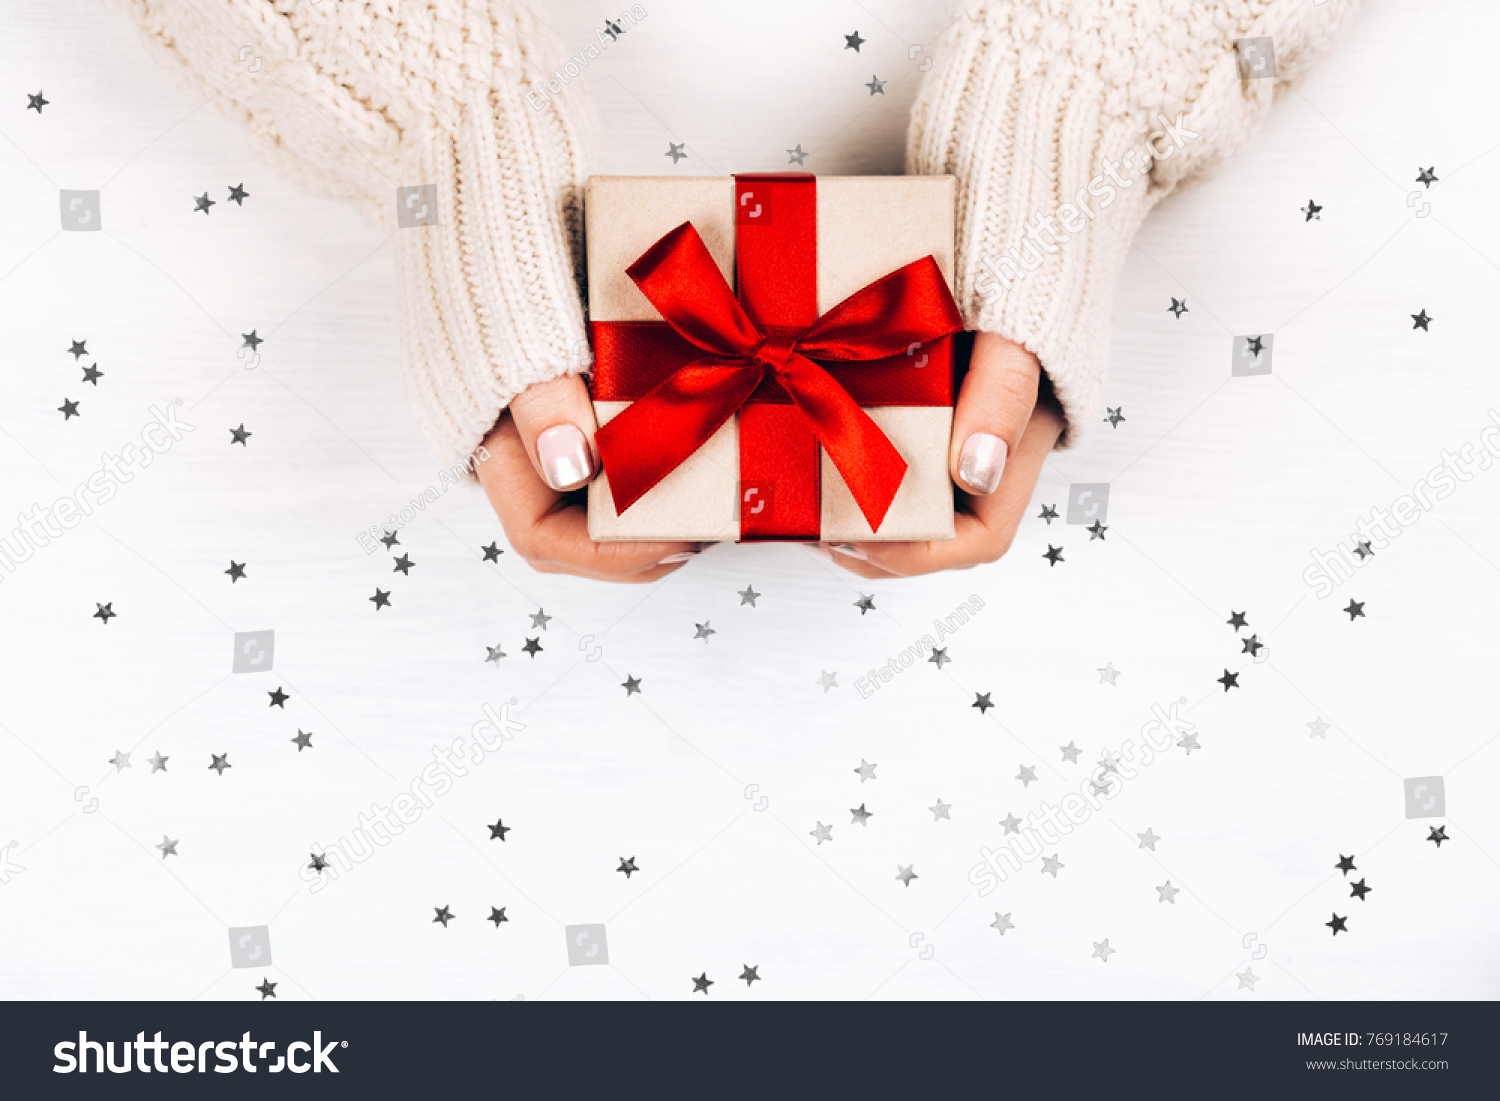 Female hands holding present with red bow on white rustic background with silver sparkles. Festive backdrop for holidays: Birthday, Valentines day, Christmas, New Year. Flat lay style #769184617